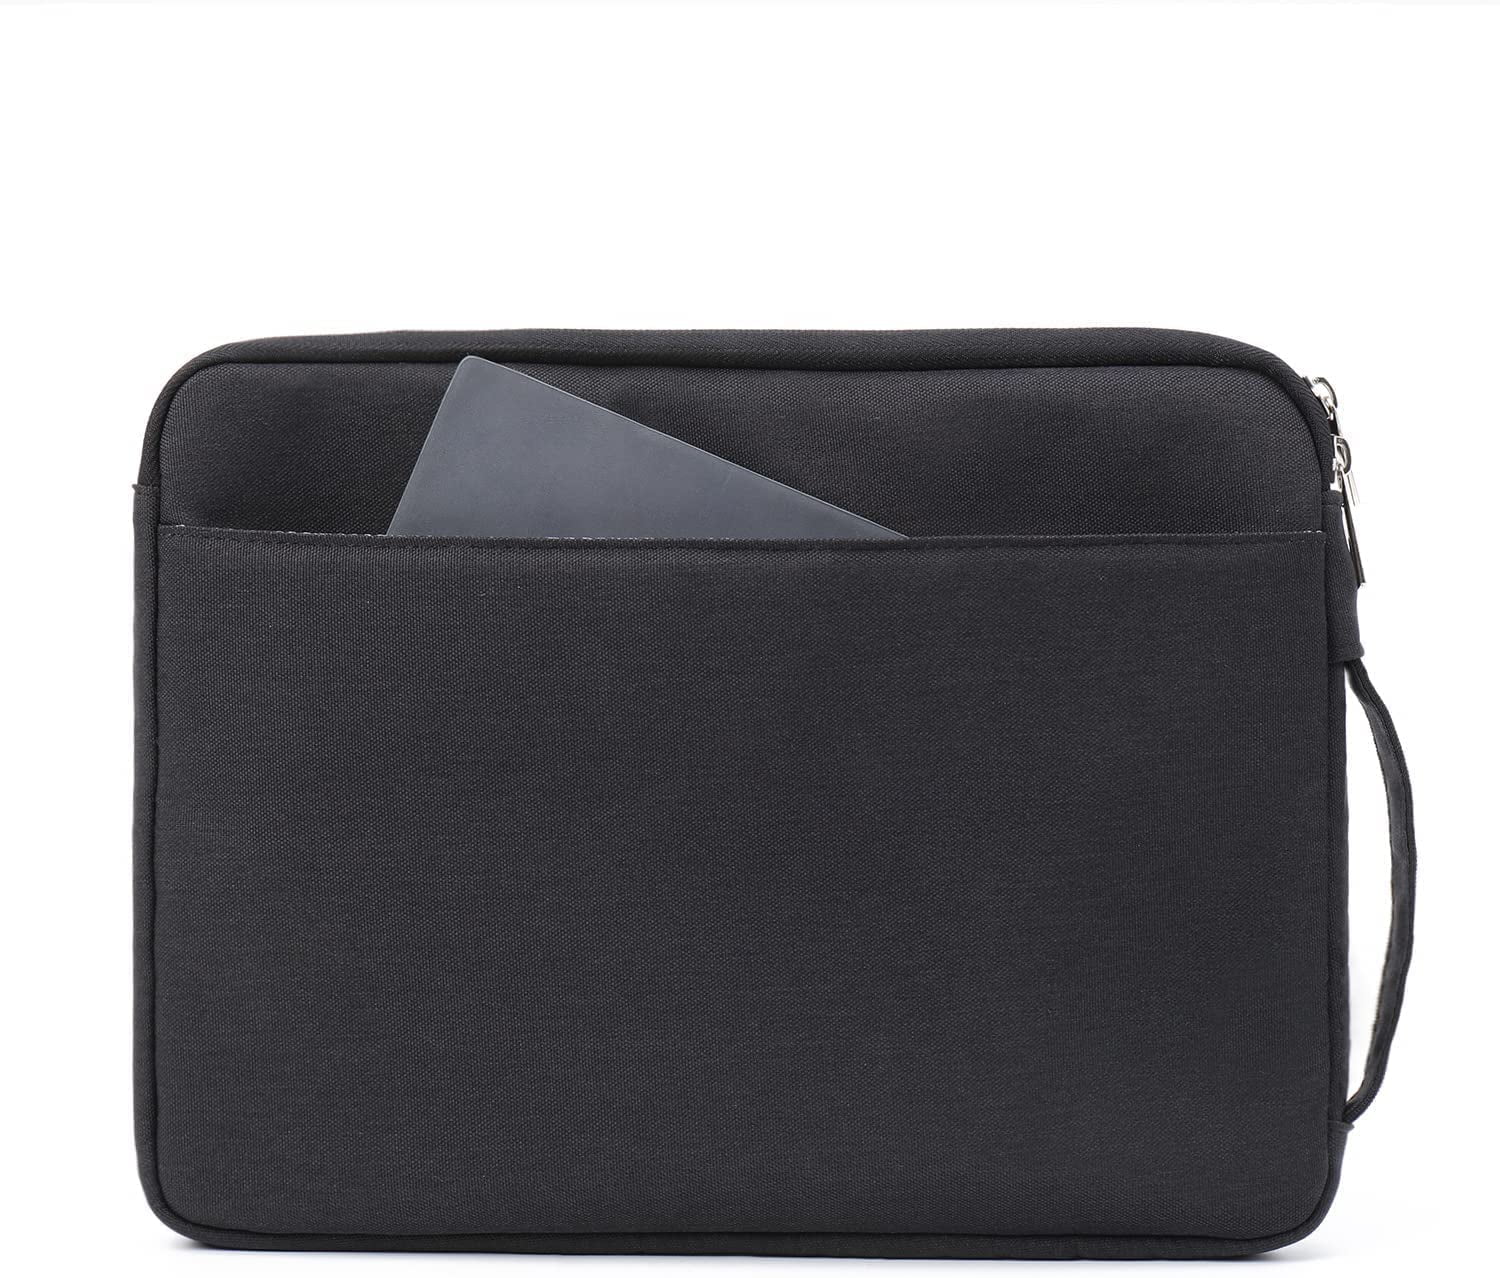 Chalk Factory Black Genuine Leather Sleeve Cum Bag for Microsoft Surface  Pro 4 CR5-00028 12.3 inches Laptop : Amazon.in: Computers & Accessories